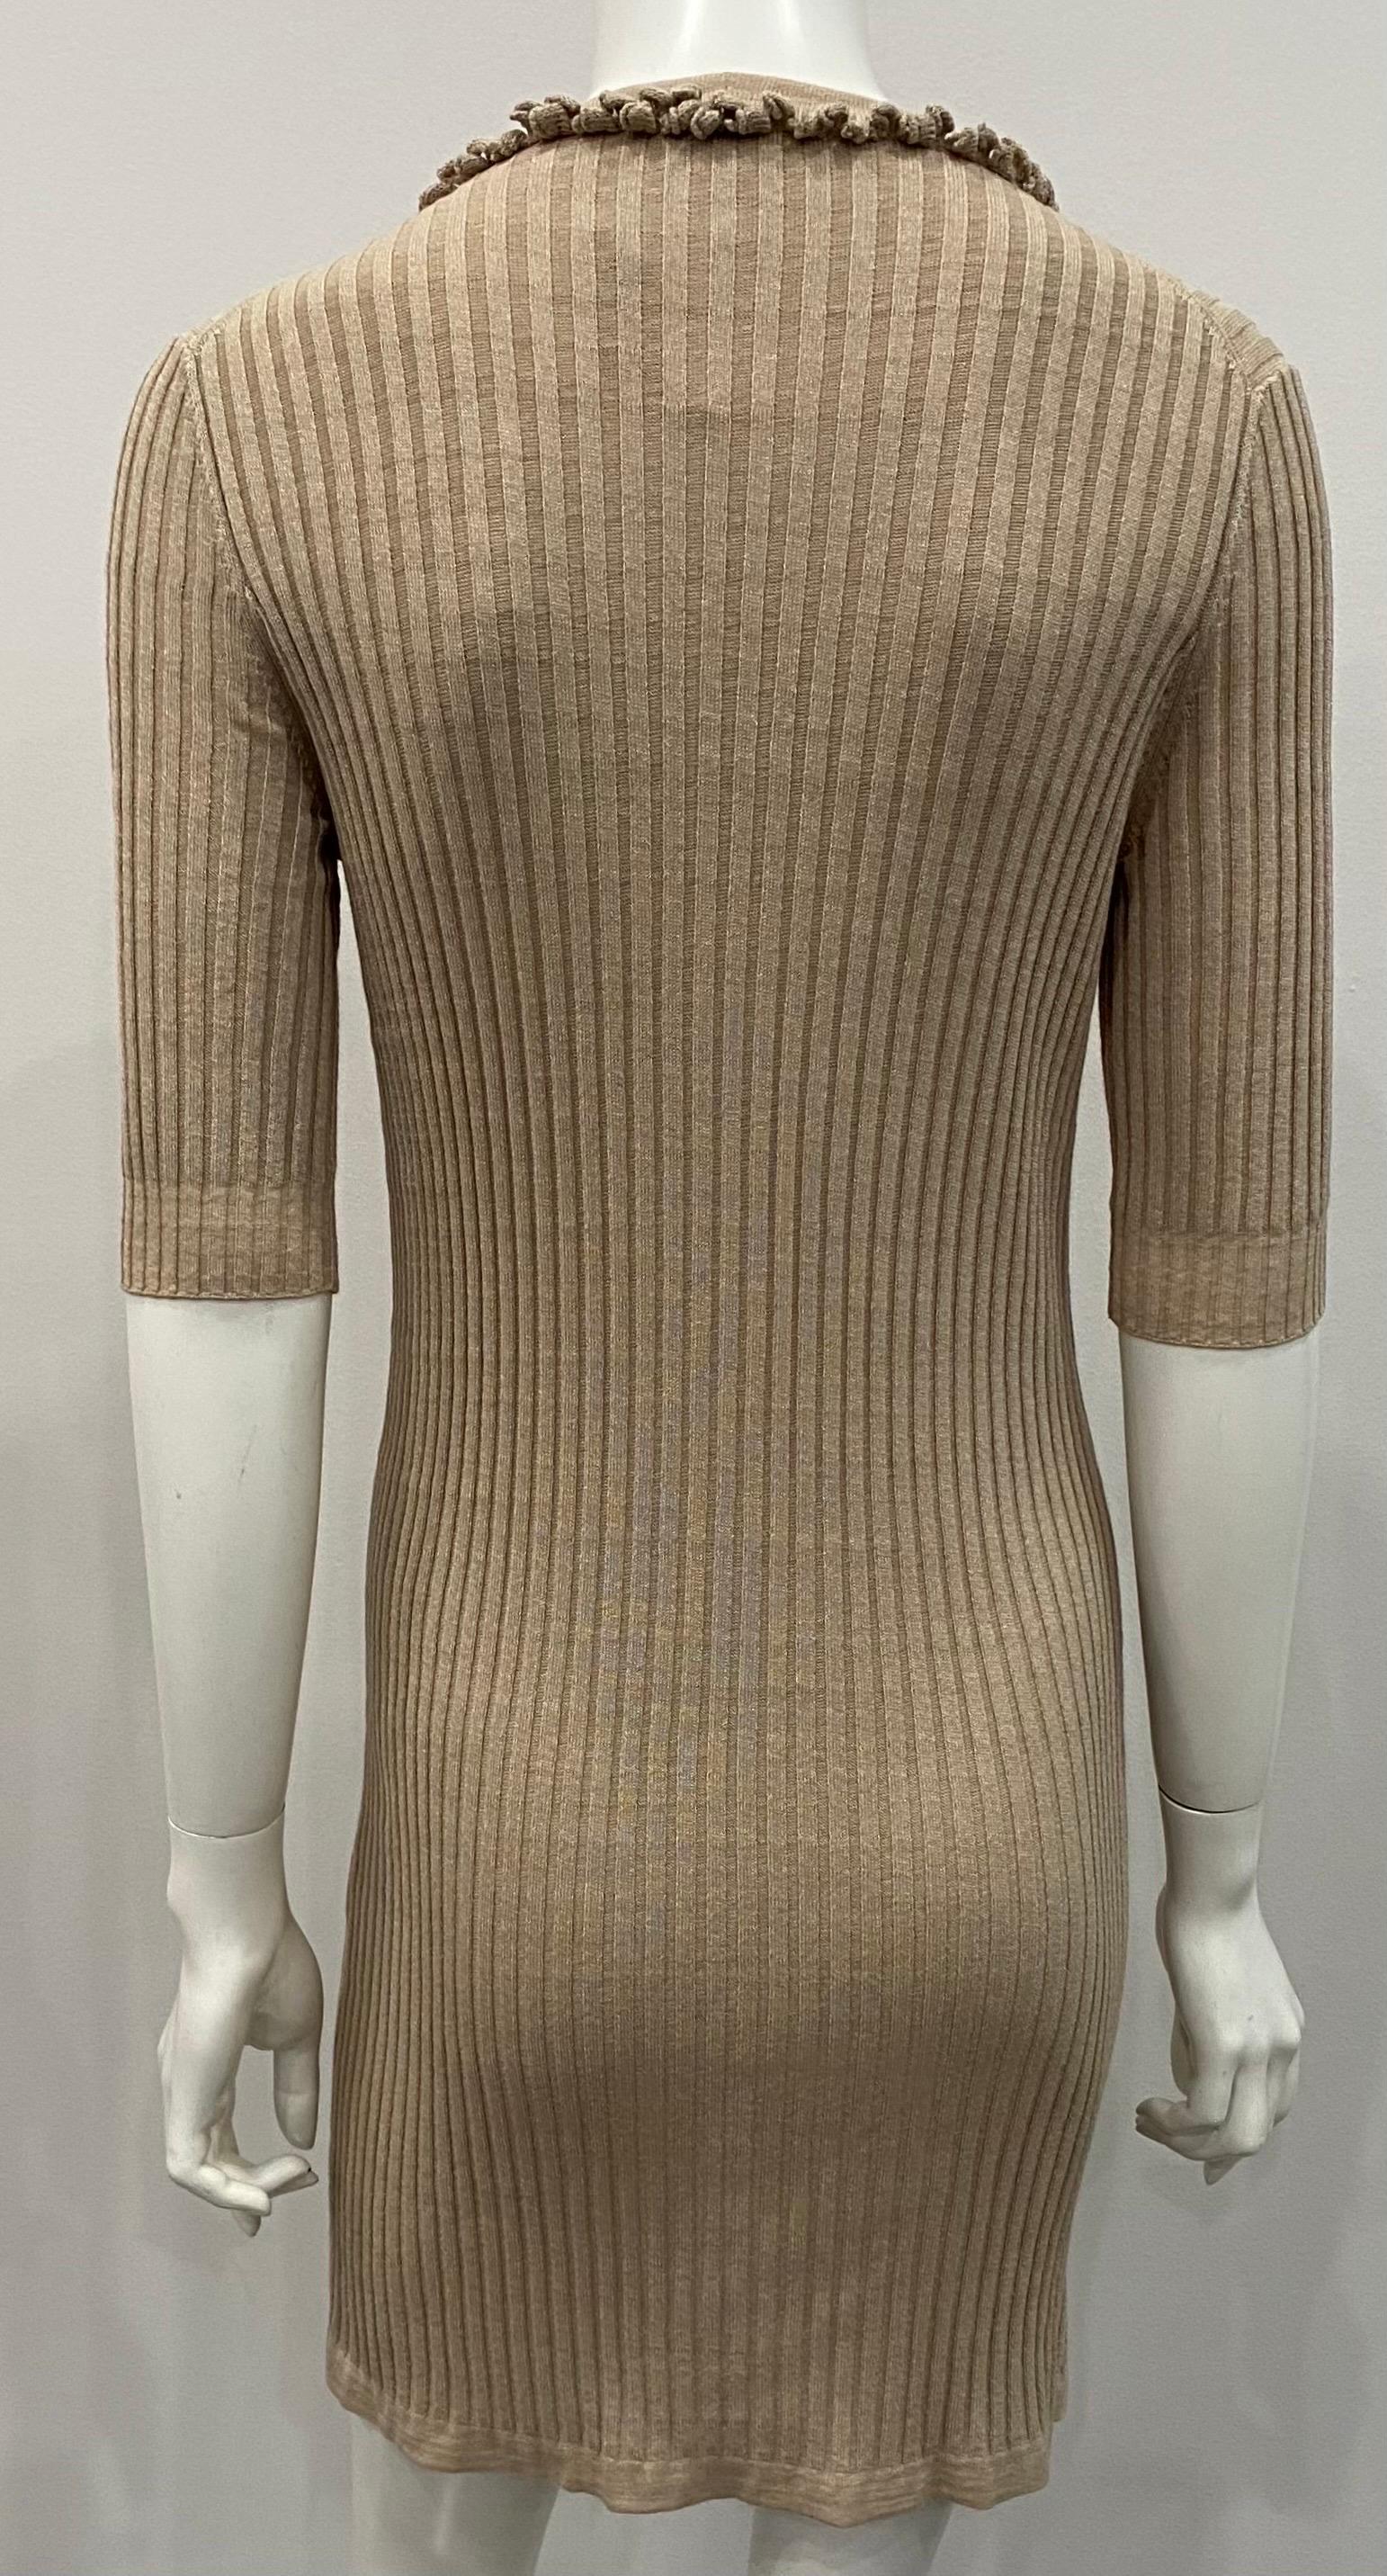 Chanel Champagne Cotton Knit 3/4 Sleeve Sleeve Dress/Coat - Sz 38 For Sale 1